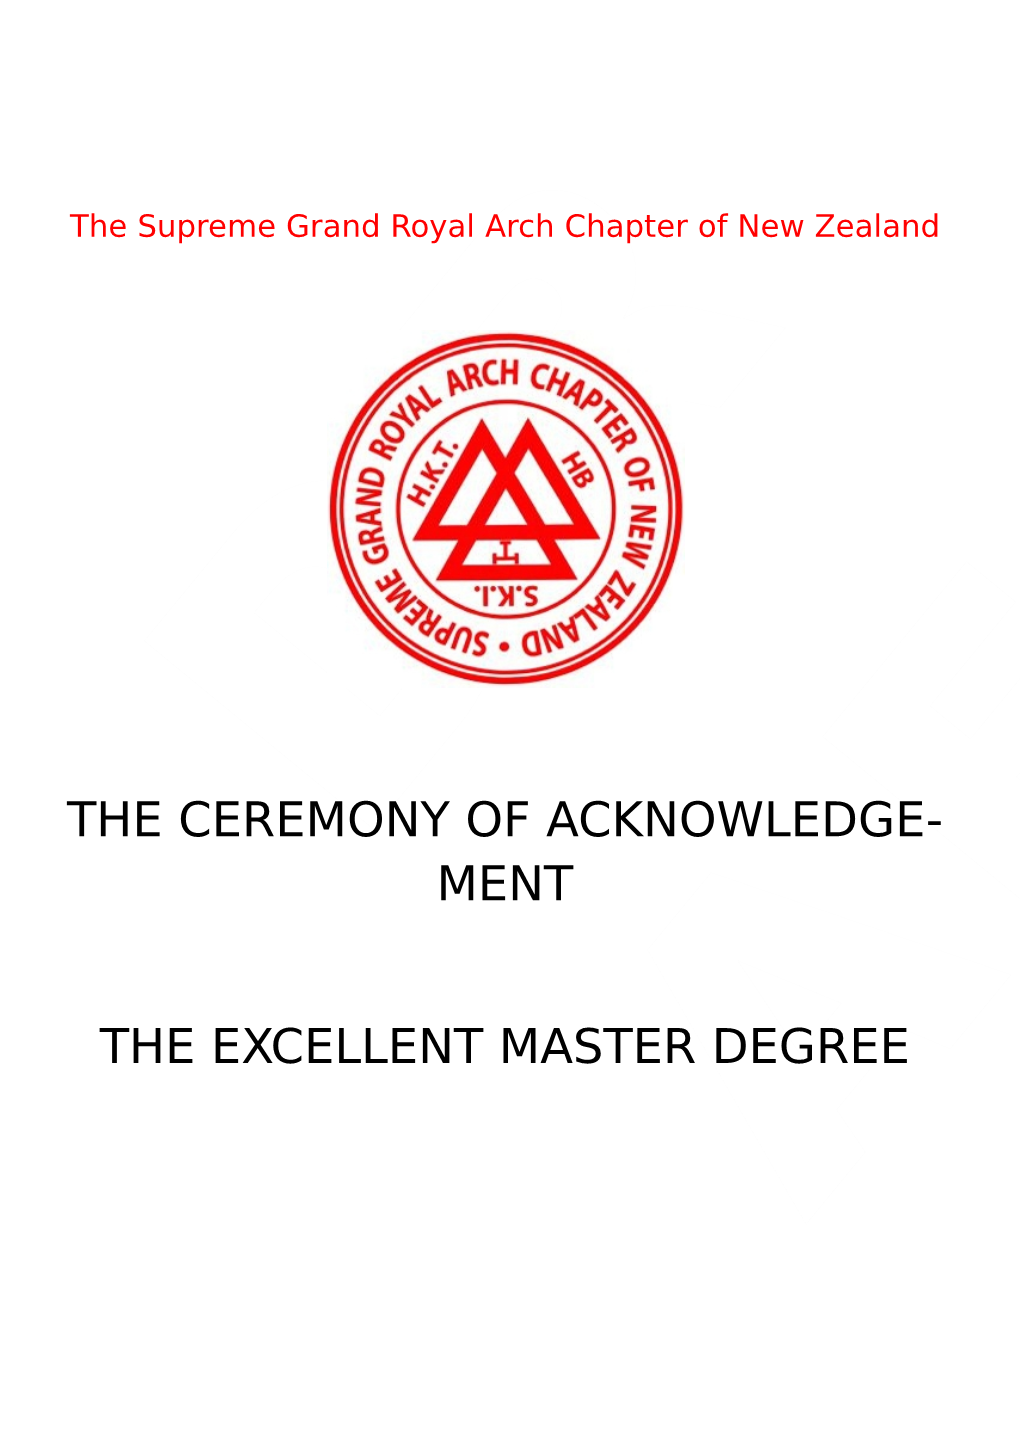 Ment the Excellent Master Degree